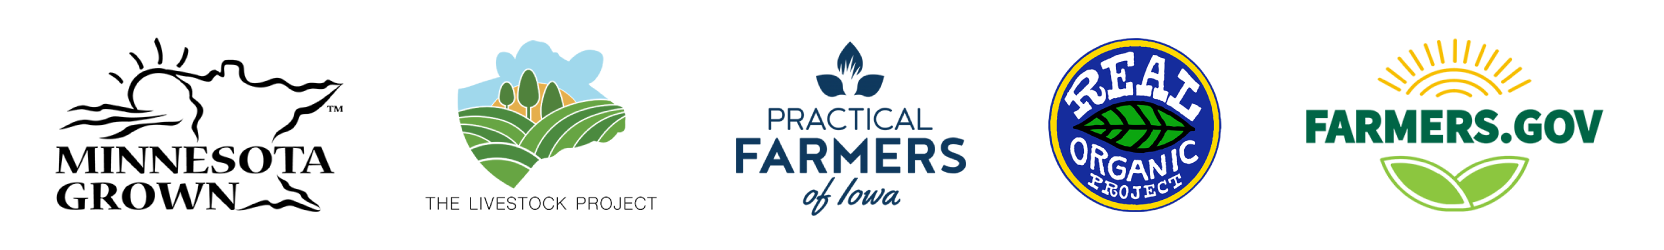 Logos for Minnesota Grown, The Livestock Project, Practical Farmers of Iowa, Real Organic Project, and Farmers.gov